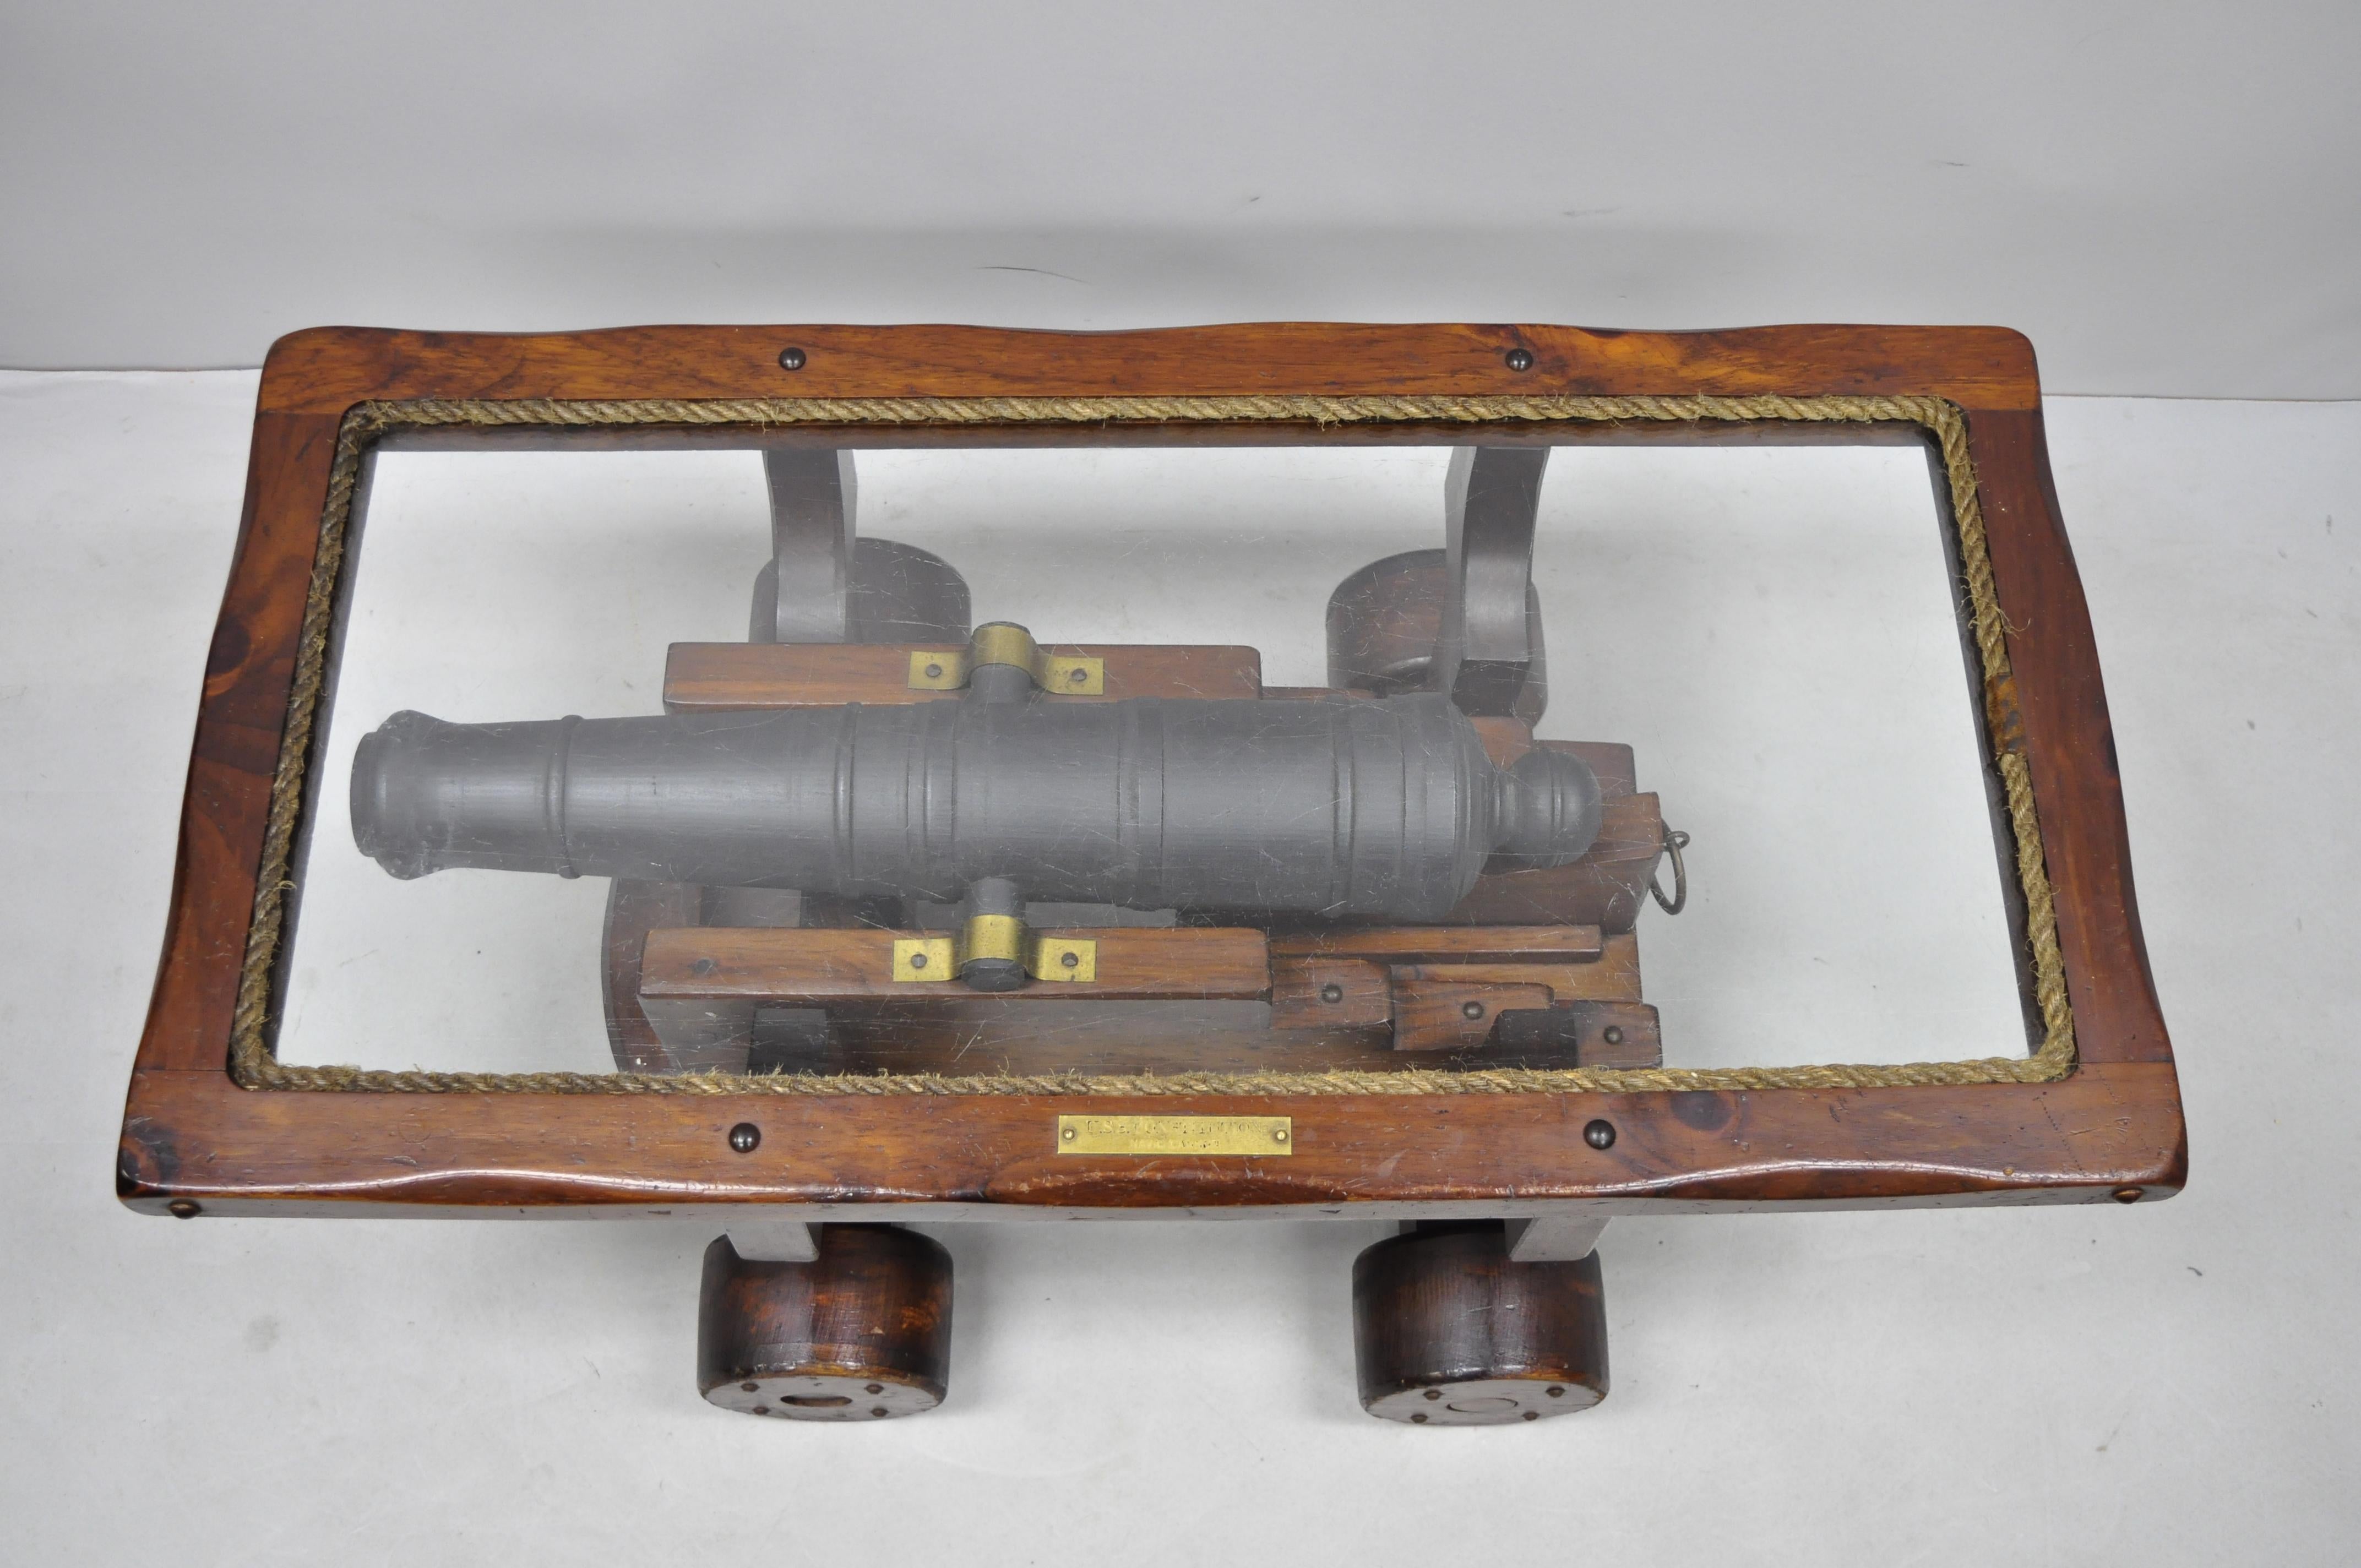 Vintage USS Constitution simulated naval cannon wooden coffee table. Item features carved wood simulated cannon, glass top rope trim, fixed wheels, solid wood construction, beautiful wood grain, distressed finish, brass plaque reads 